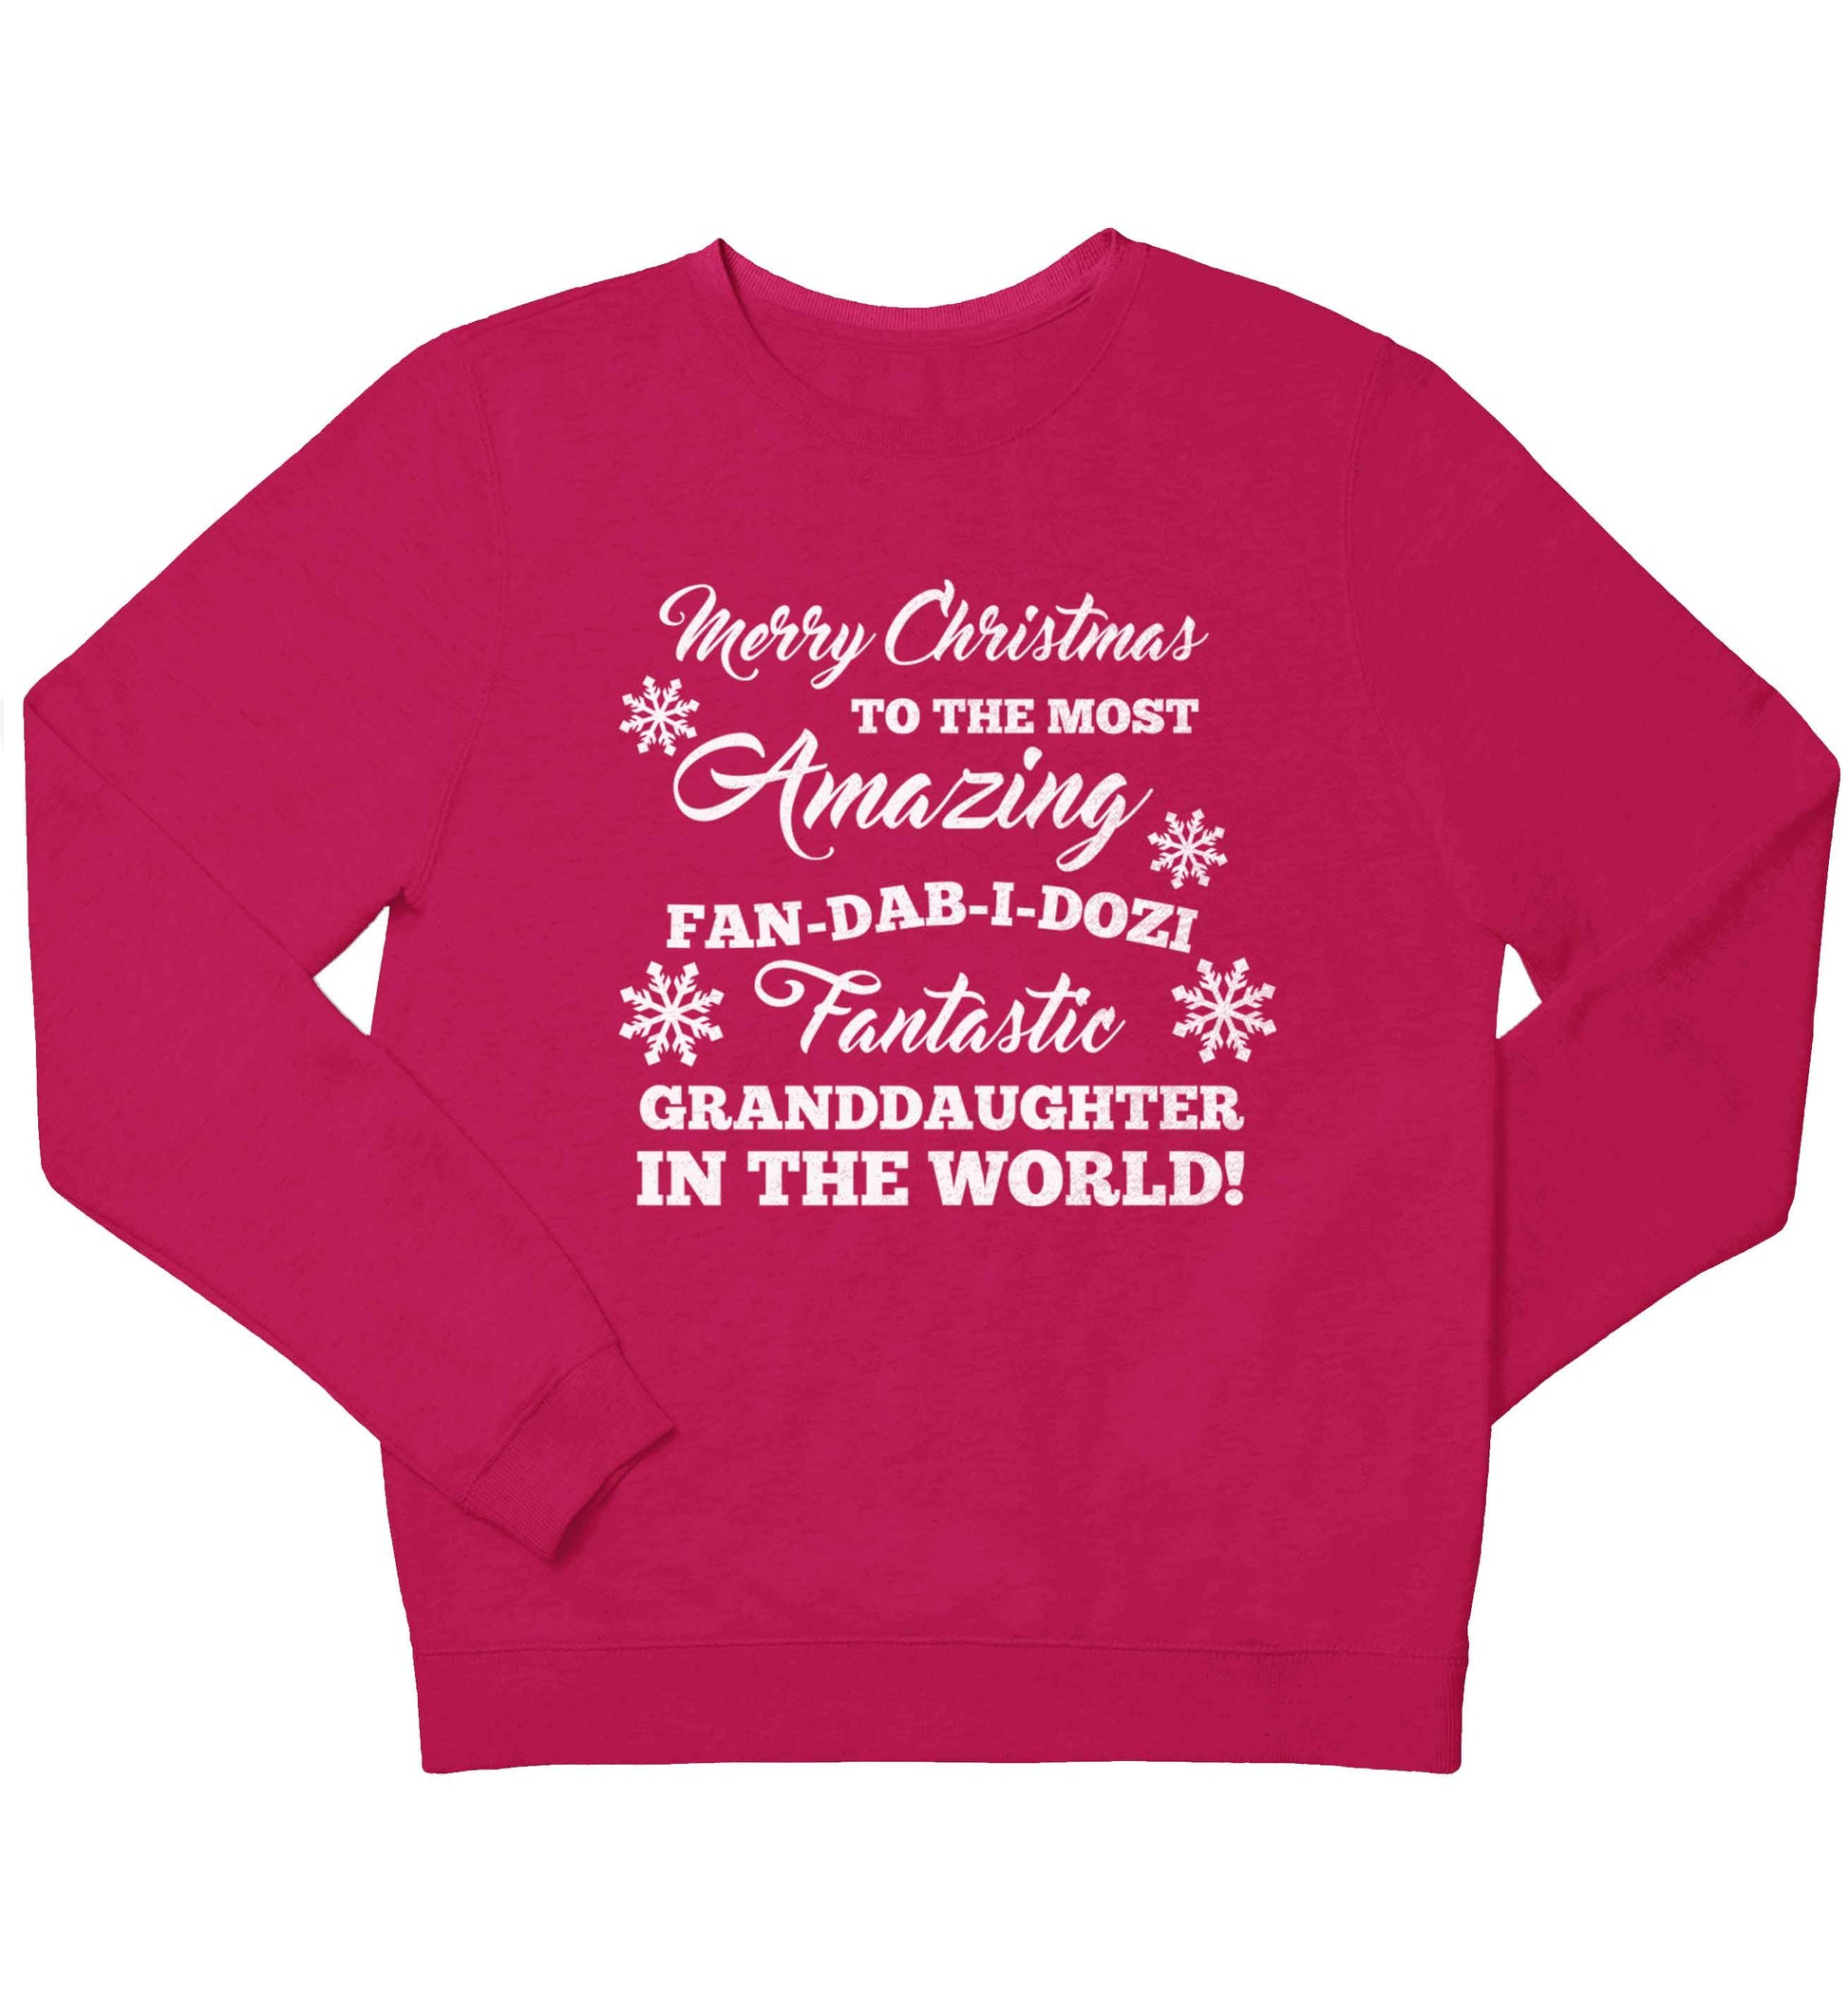 Merry Christmas to the most amazing fan-dab-i-dozi fantasic Granddaughter in the world children's pink sweater 12-13 Years